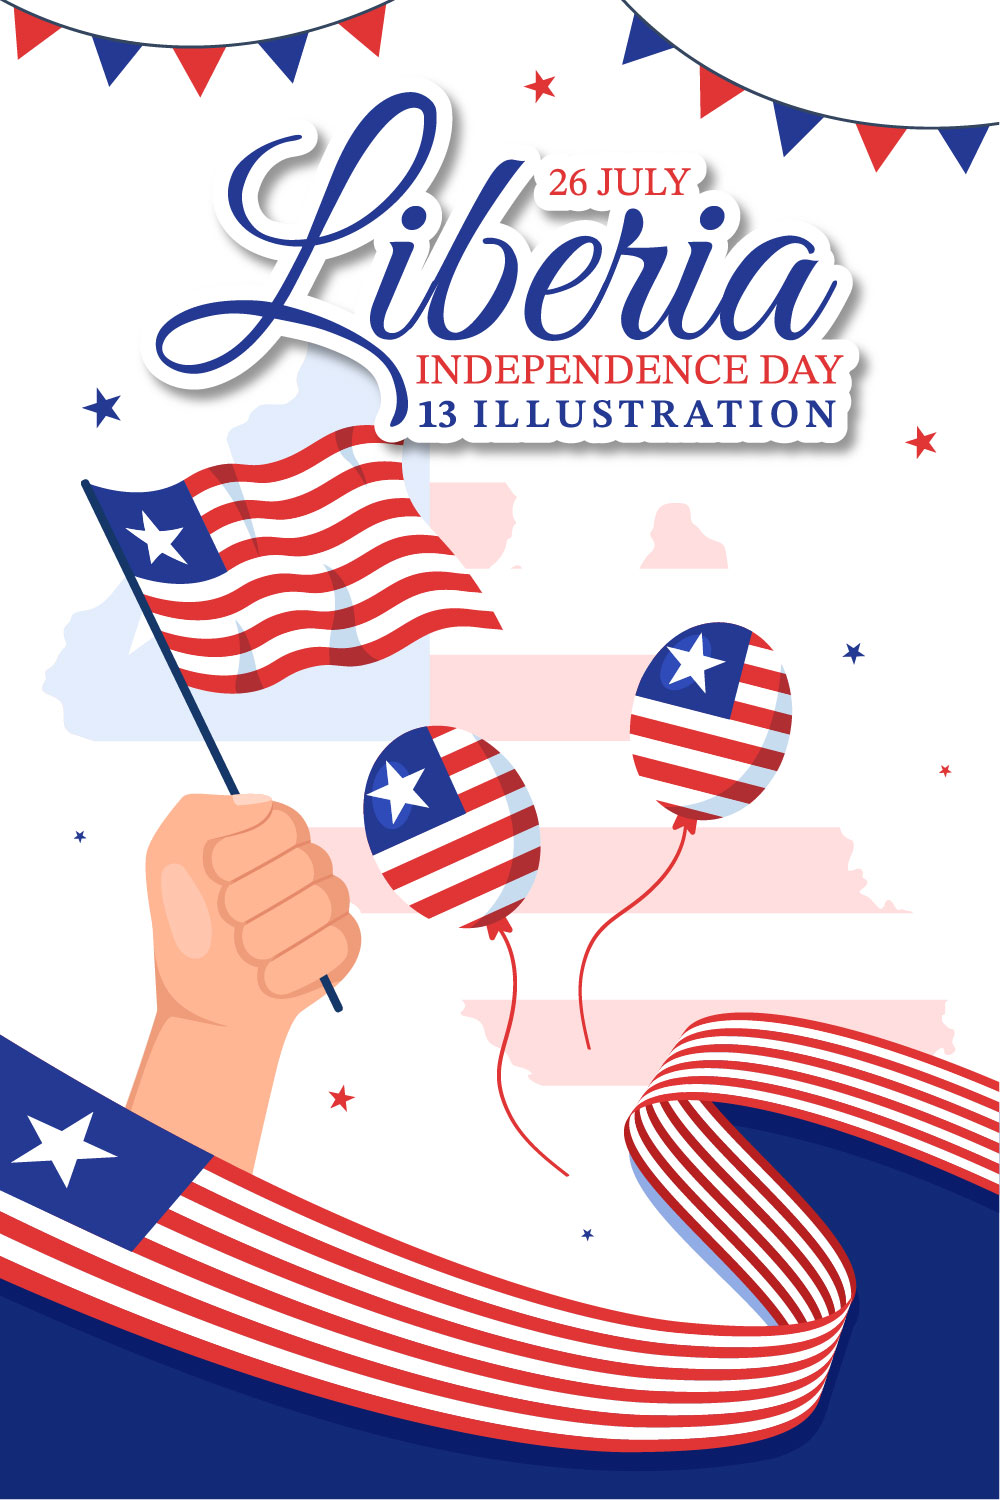 13 Happy Liberia Independence Day Illustration pinterest preview image.